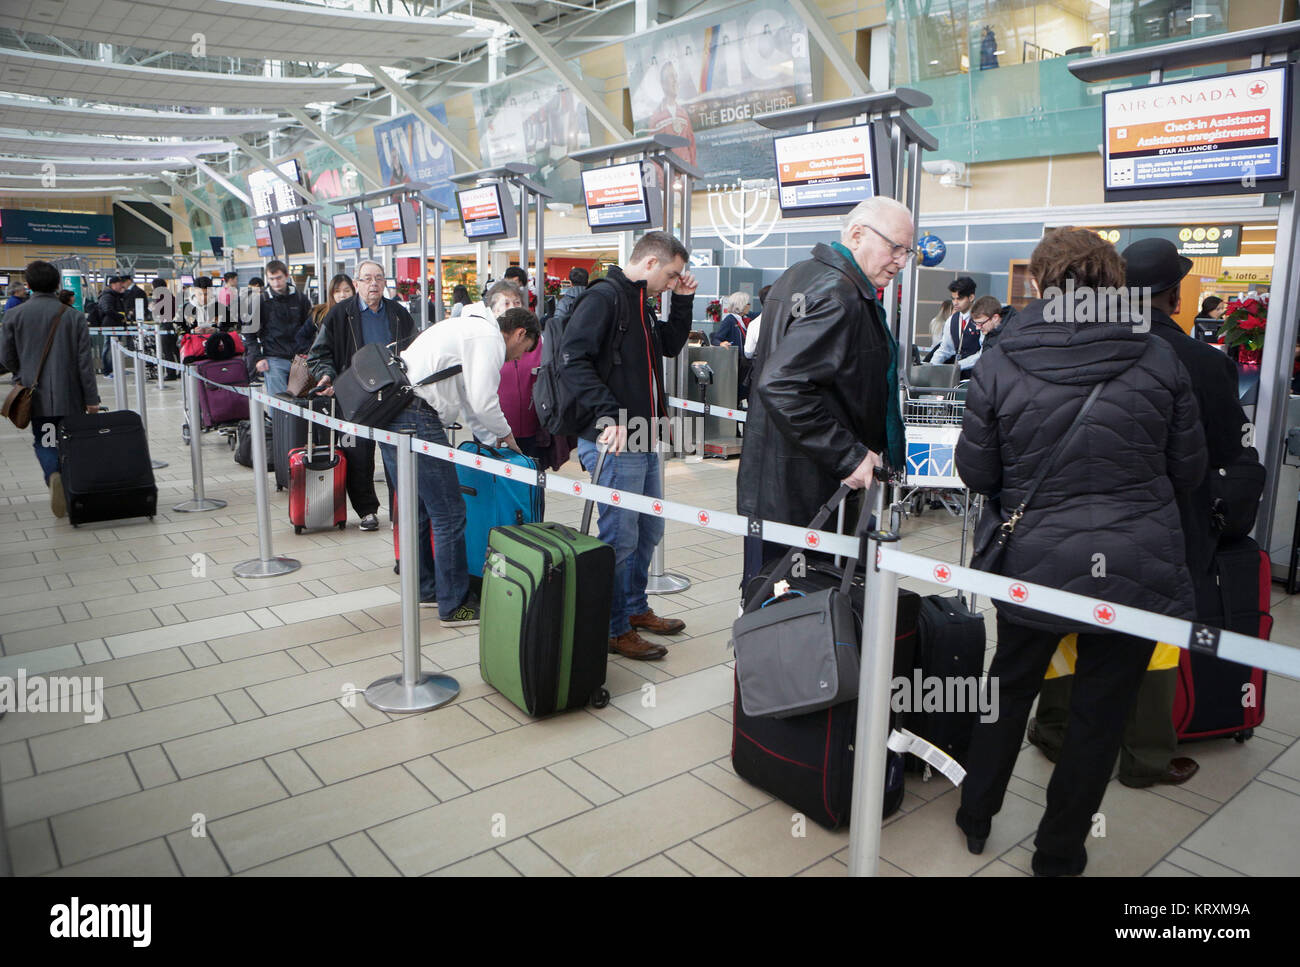 Vancouver. 21st Dec, 2017. Travellers line up to check in at the departure hall of Vancouver International Airport in Vancouver, Canada. Dec. 21, 2017. The airport gets busier as the holiday season starts. Credit: Liang Sen/Xinhua/Alamy Live News Stock Photo